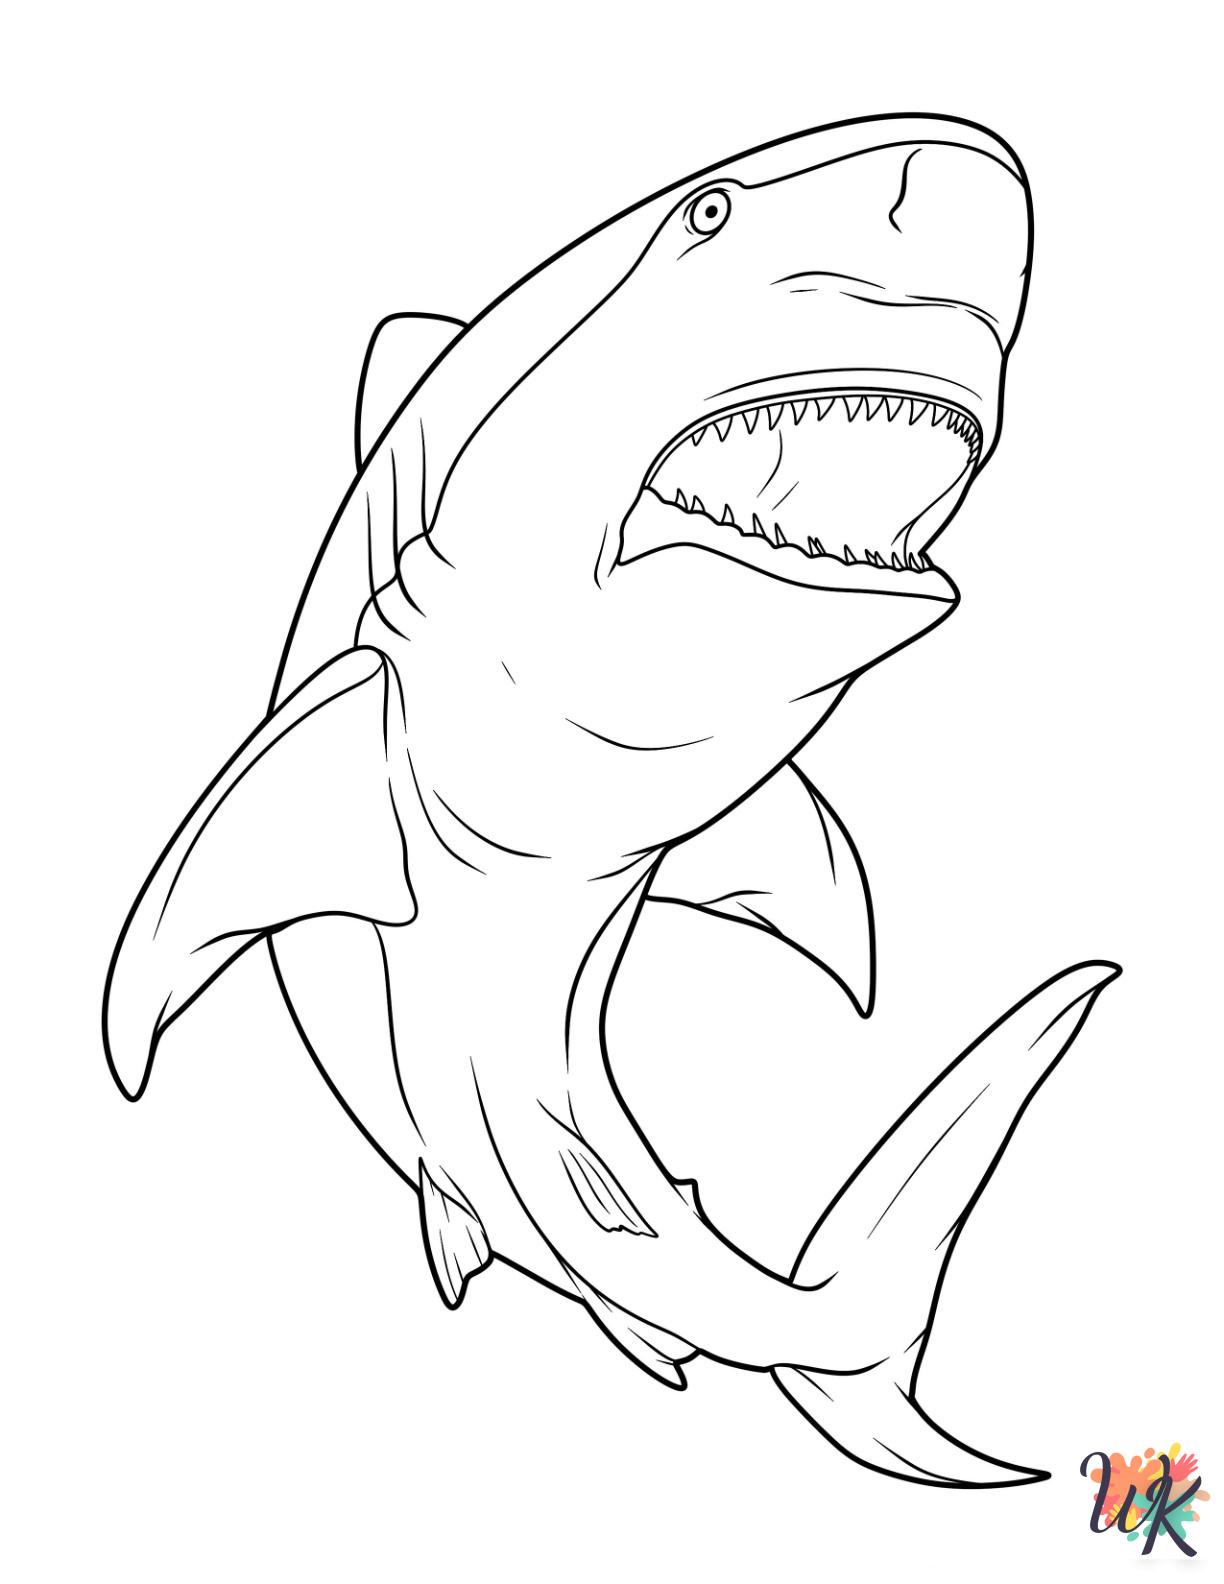 coloring pages for kids Shark